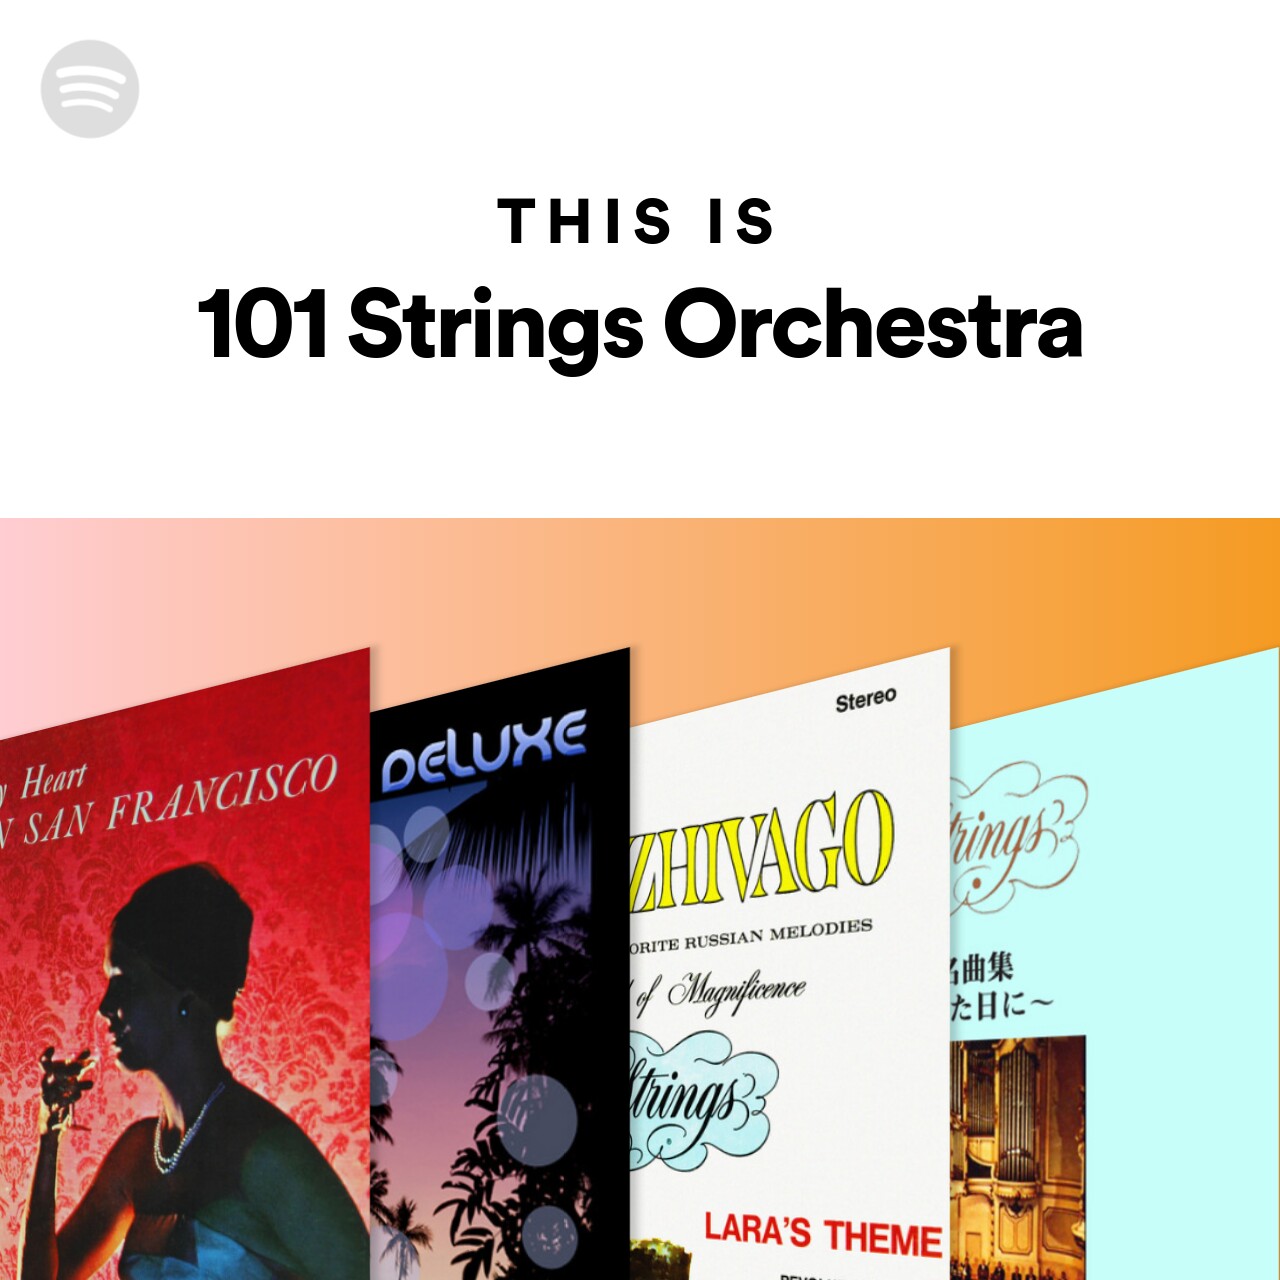 This Is 101 Strings Orchestra